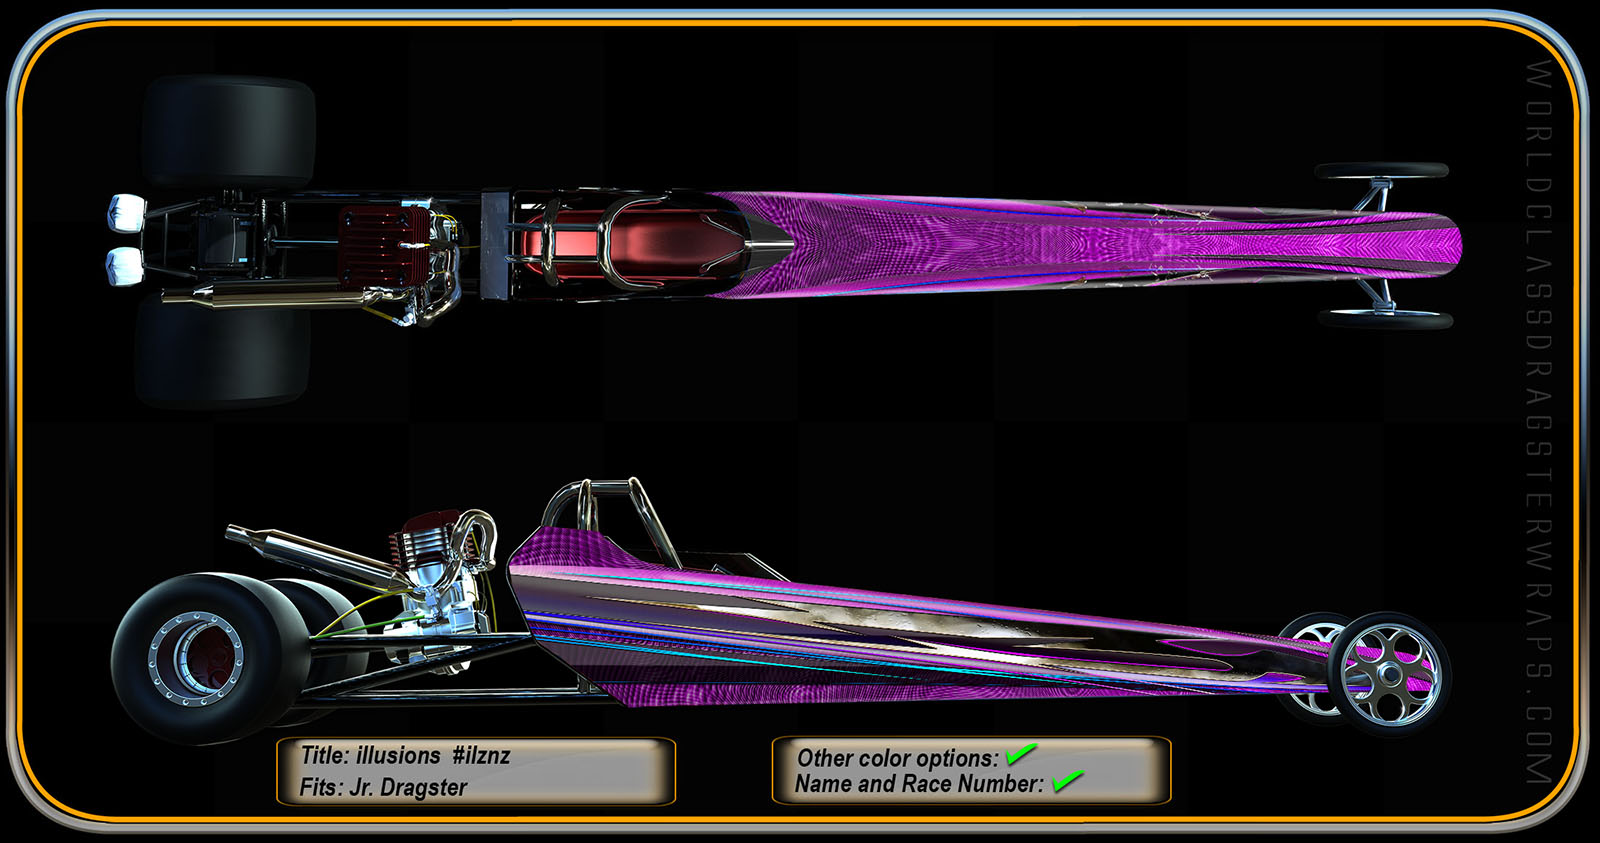 Claymore junior dragster wrap